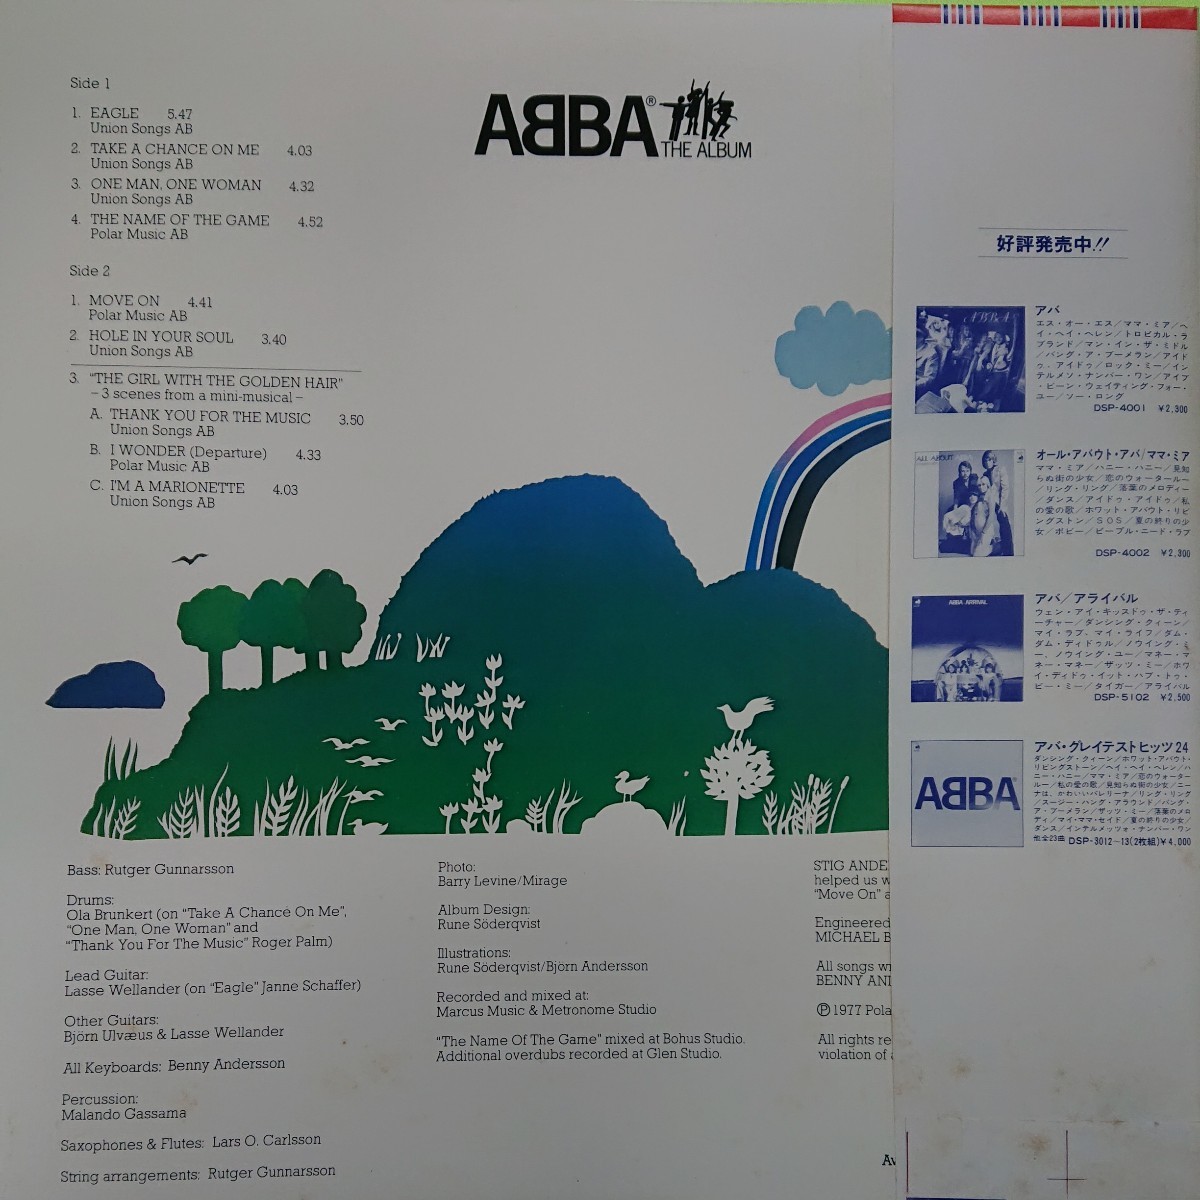 LP /ABBA (THE ALBUM)*5 point and more together ( postage 0 jpy ) free *